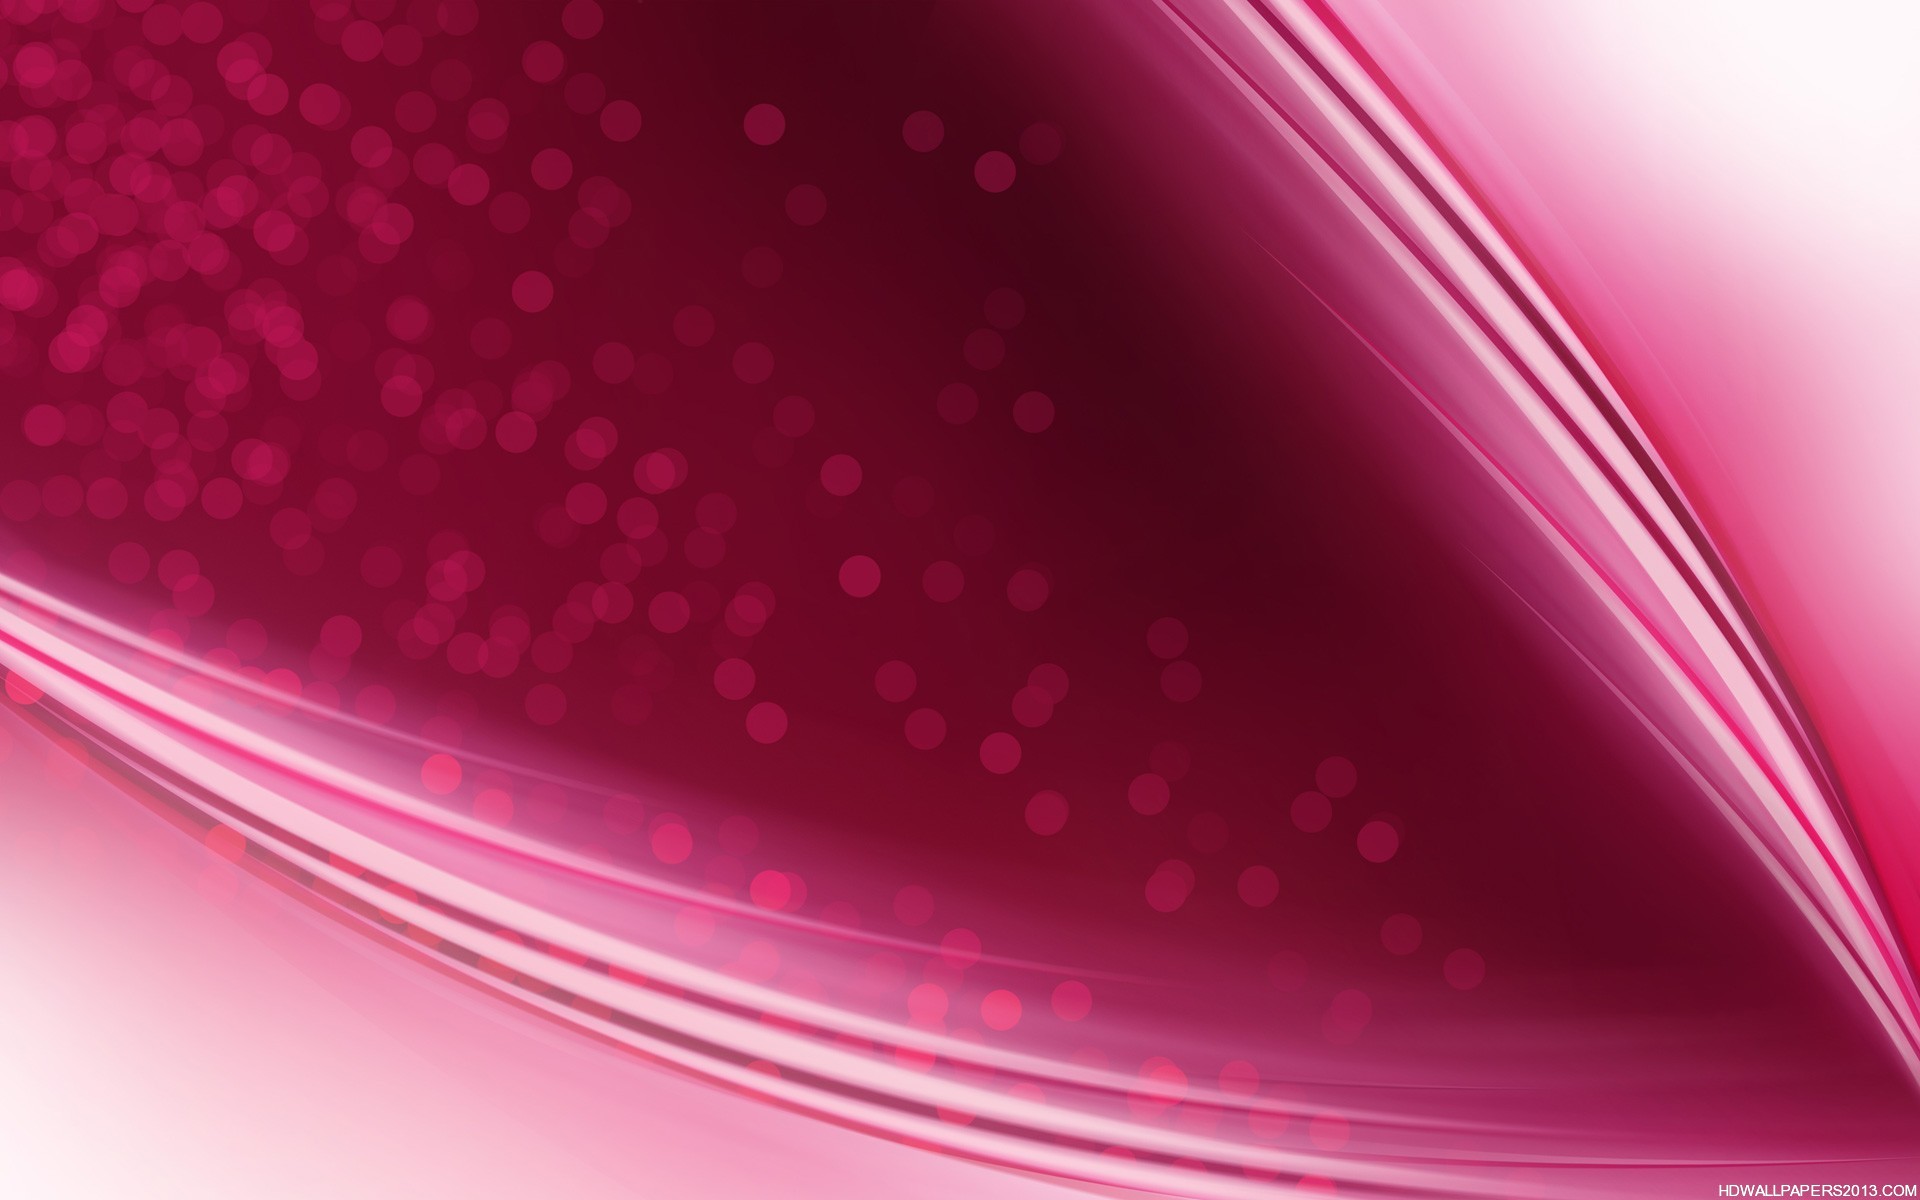 10 Greatest high resolution pink desktop wallpaper You Can Save It Free ...